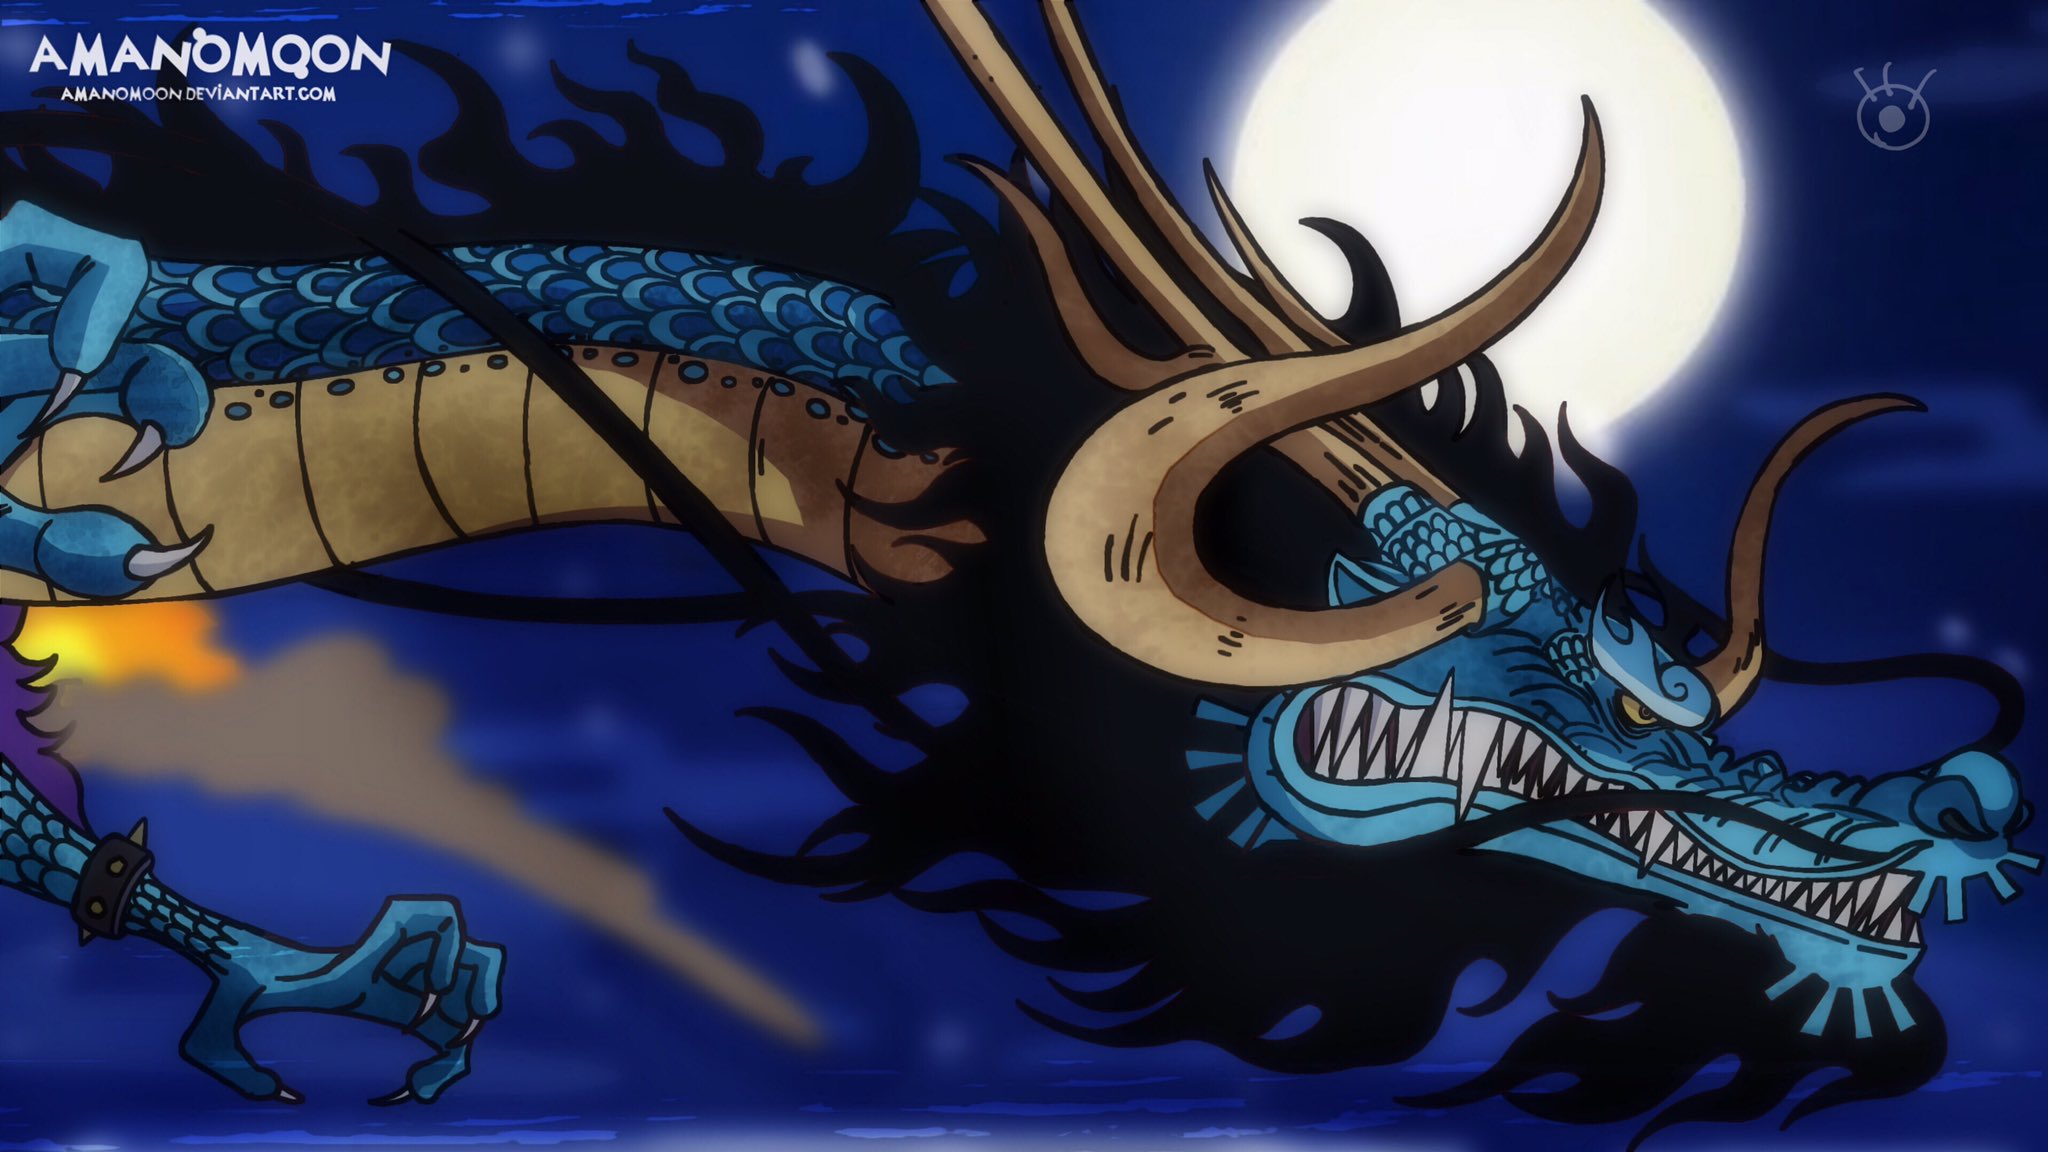 One Piece Kaido Dragon Colors In Anime Style By Amanomoon On Deviantart